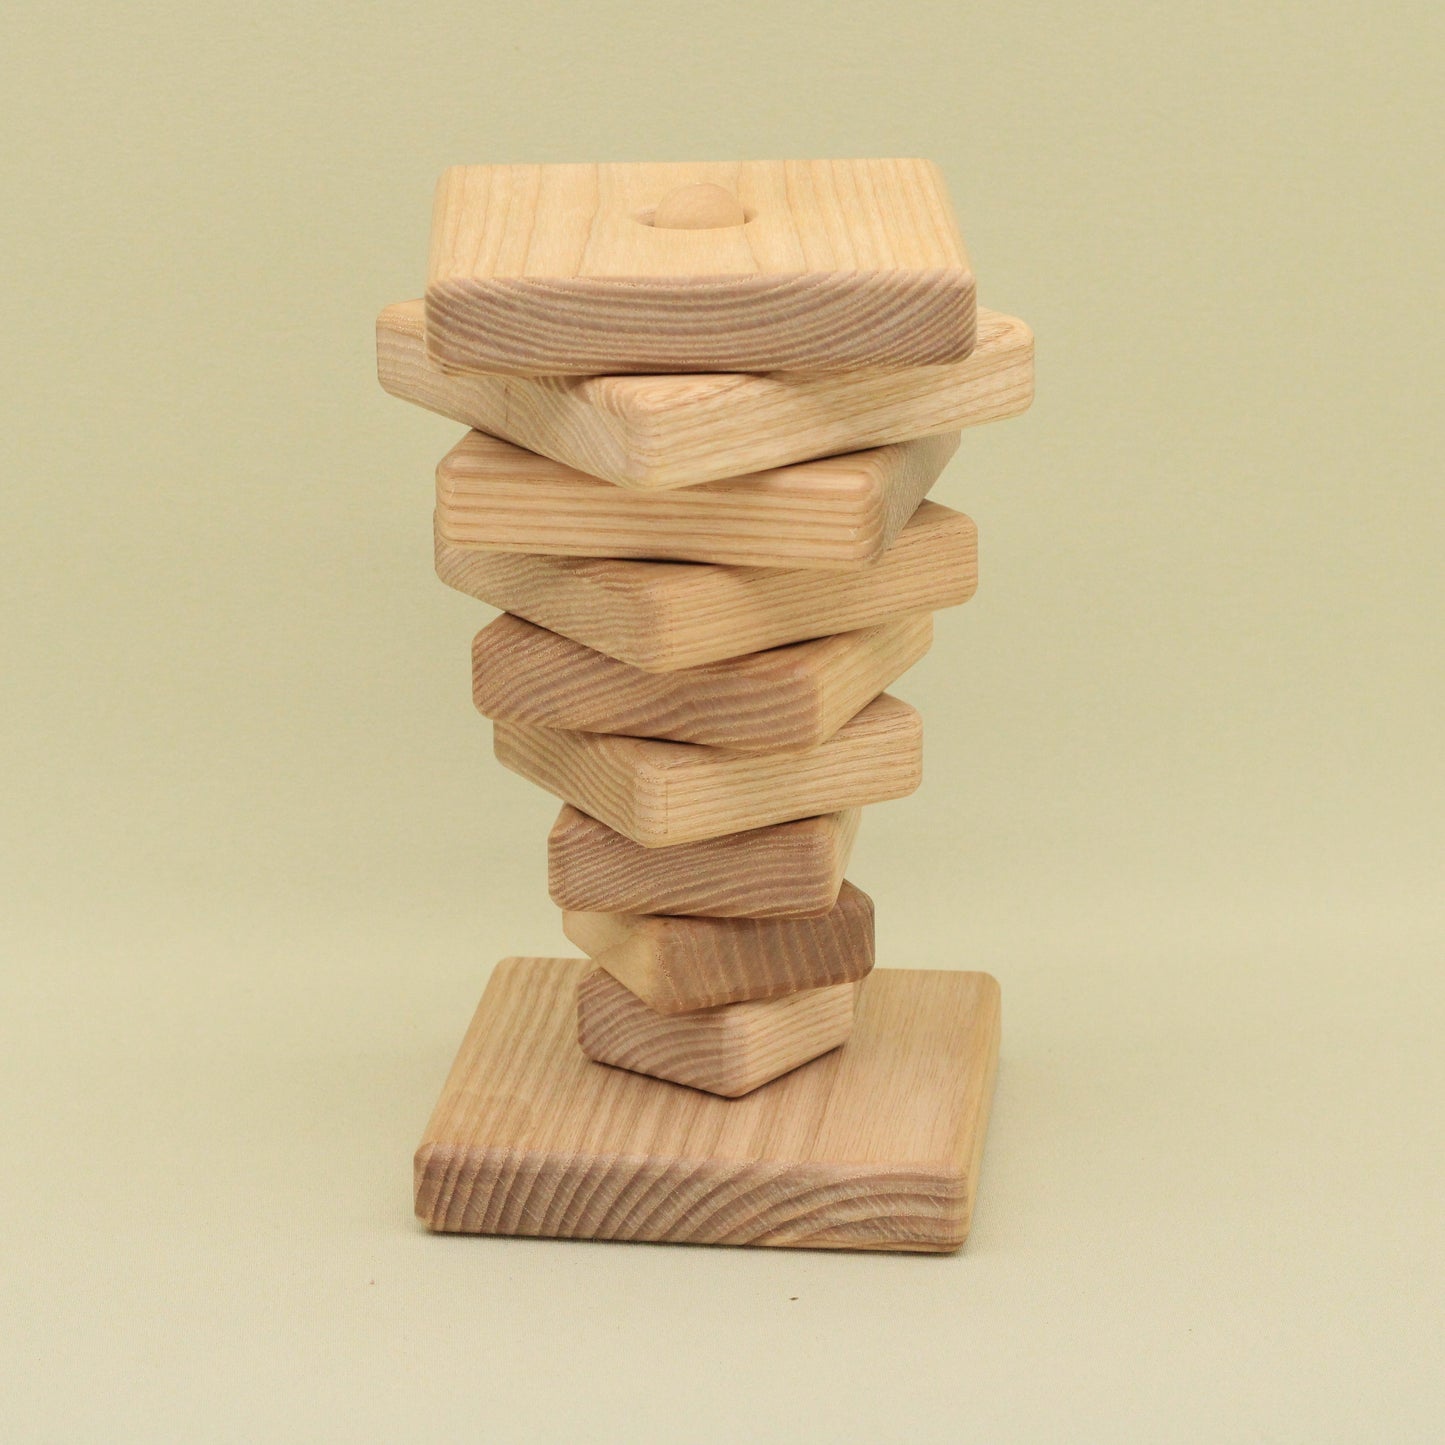 Lotes Toys Natural Square Wooden Stacking Pyramid - 10 pieces PY01